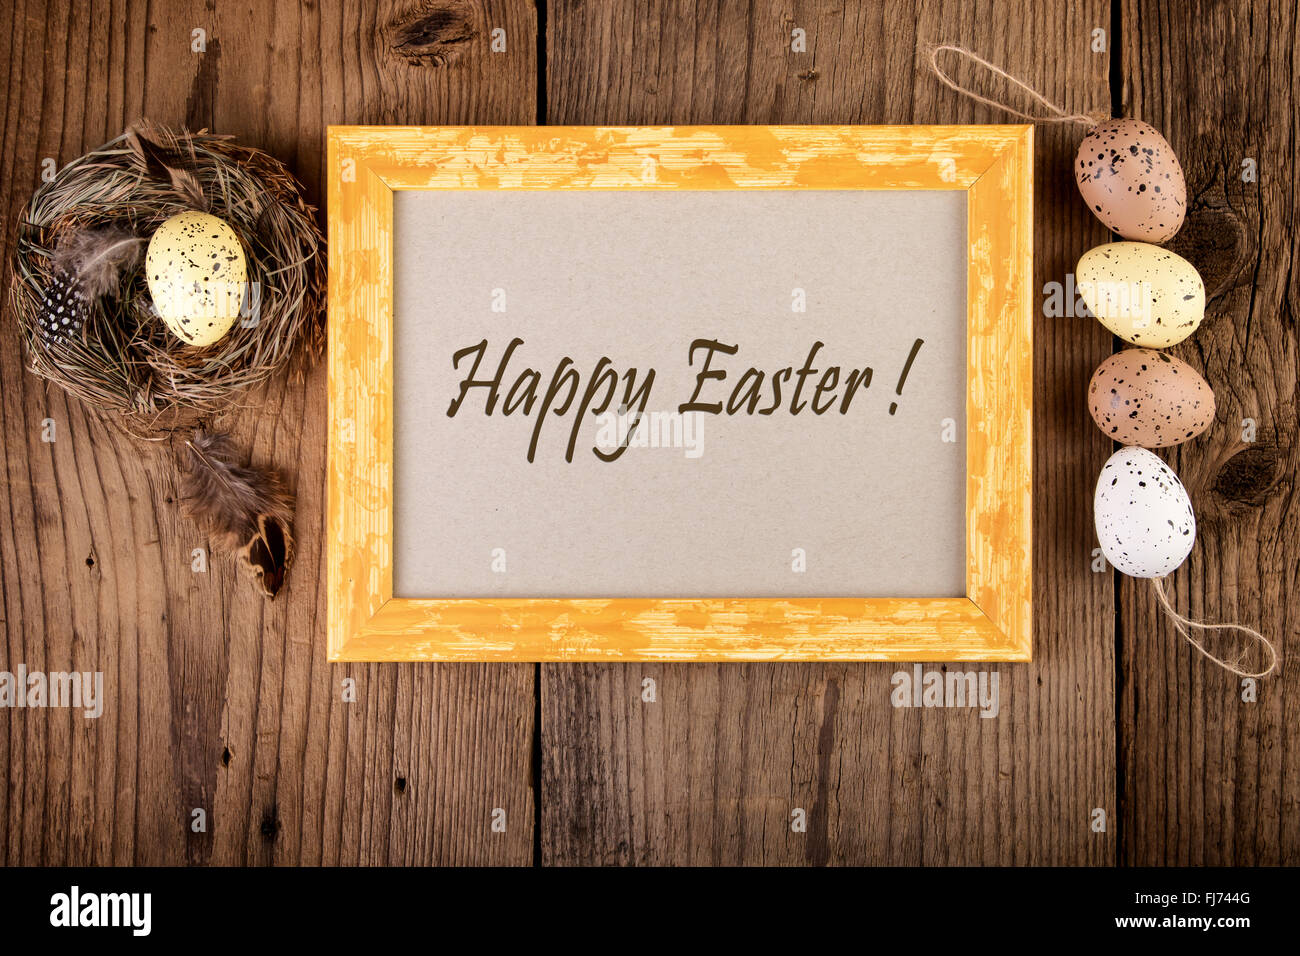 Easter decoration on old wood vintage style. Yellow wooden frame with text Happy Easter. Stock Photo